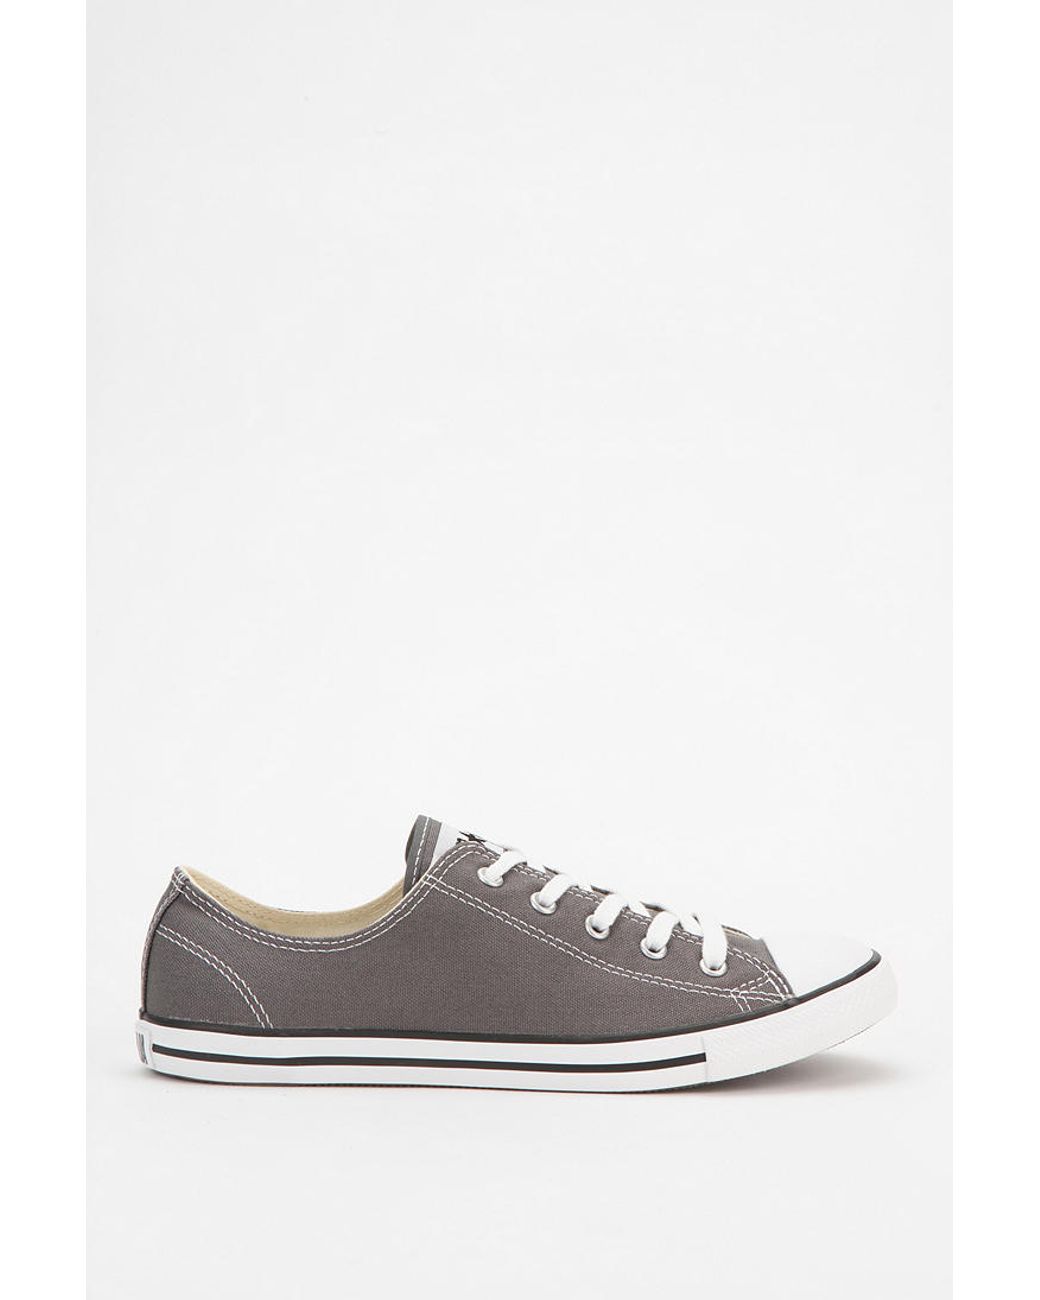 Converse Chuck Taylor All Star Dainty Womens Canvas Sneaker in Gray | Lyst